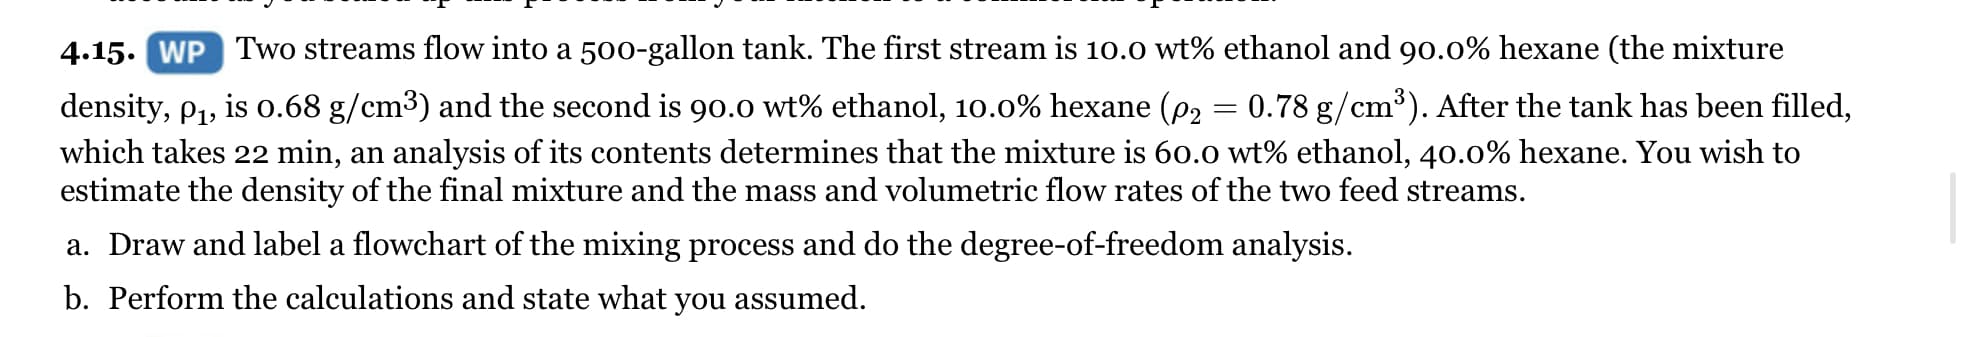 4.15. WP Two streams flow into a 500-gallon tank. The first stream is 10.0 wt% ethanol and 90.0% hexane (the mixture
density, p1, is o.68 g/cm3) and the second is 90.0 wt% ethanol, 10.0% hexane (p2 = 0.78 g/cm³). After the tank has been filled,
which takes 22 min, an analysis of its contents determines that the mixture is 60.0 wt% ethanol, 40.0% hexane. You wish to
estimate the density of the final mixture and the mass and volumetric flow rates of the two feed streams.
a. Draw and label a flowchart of the mixing process and do the degree-of-freedom analysis.
b. Perform the calculations and state what you assumed.
